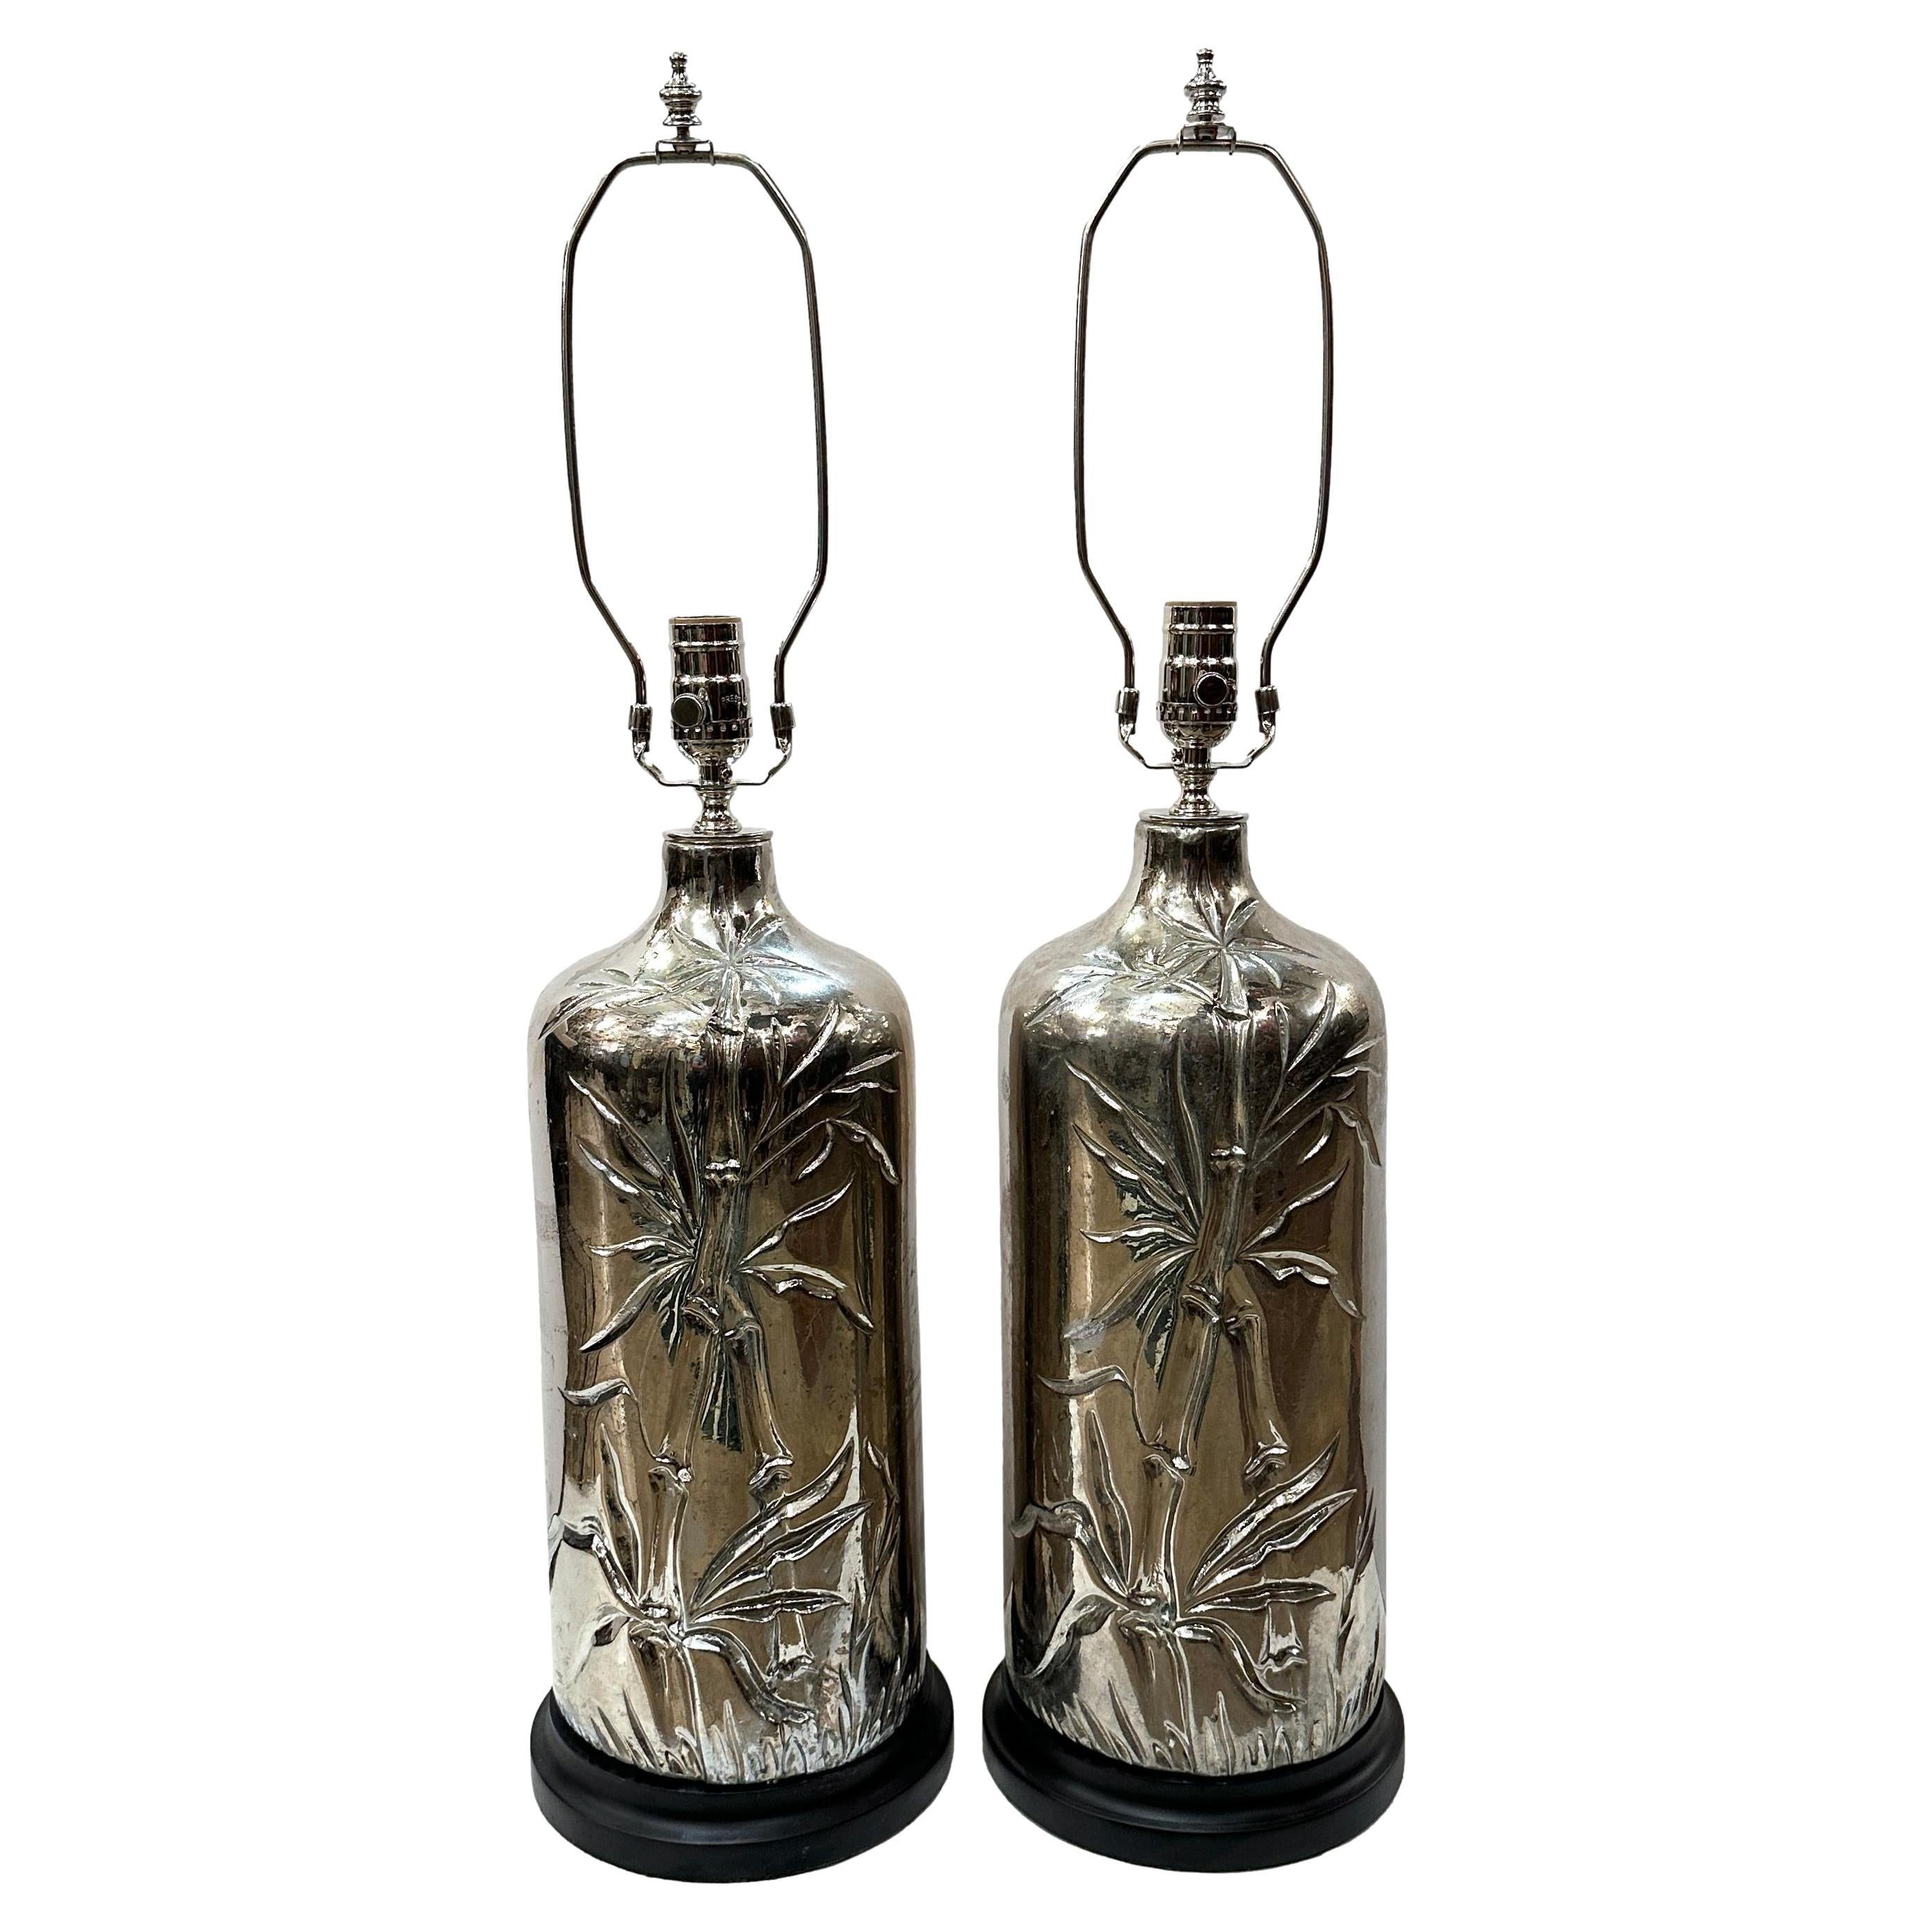 Pair of Midcentury Mercury Glass Lamps For Sale